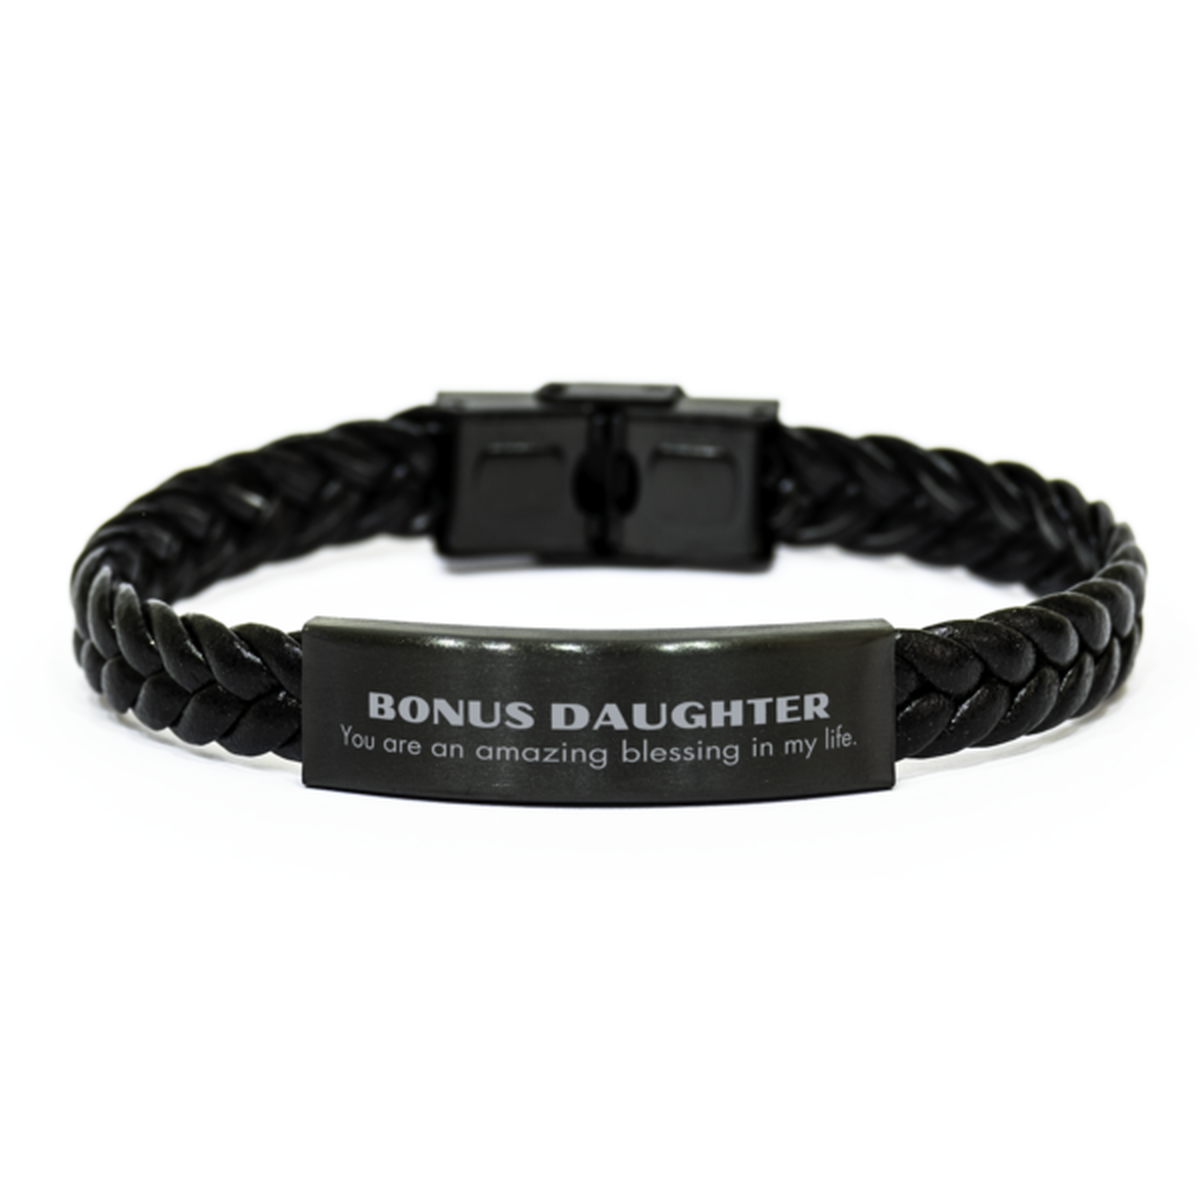 Bonus Daughter Braided Leather Bracelet, You are an amazing blessing in my life, Thank You Gifts For Bonus Daughter, Inspirational Birthday Christmas Unique Gifts For Bonus Daughter